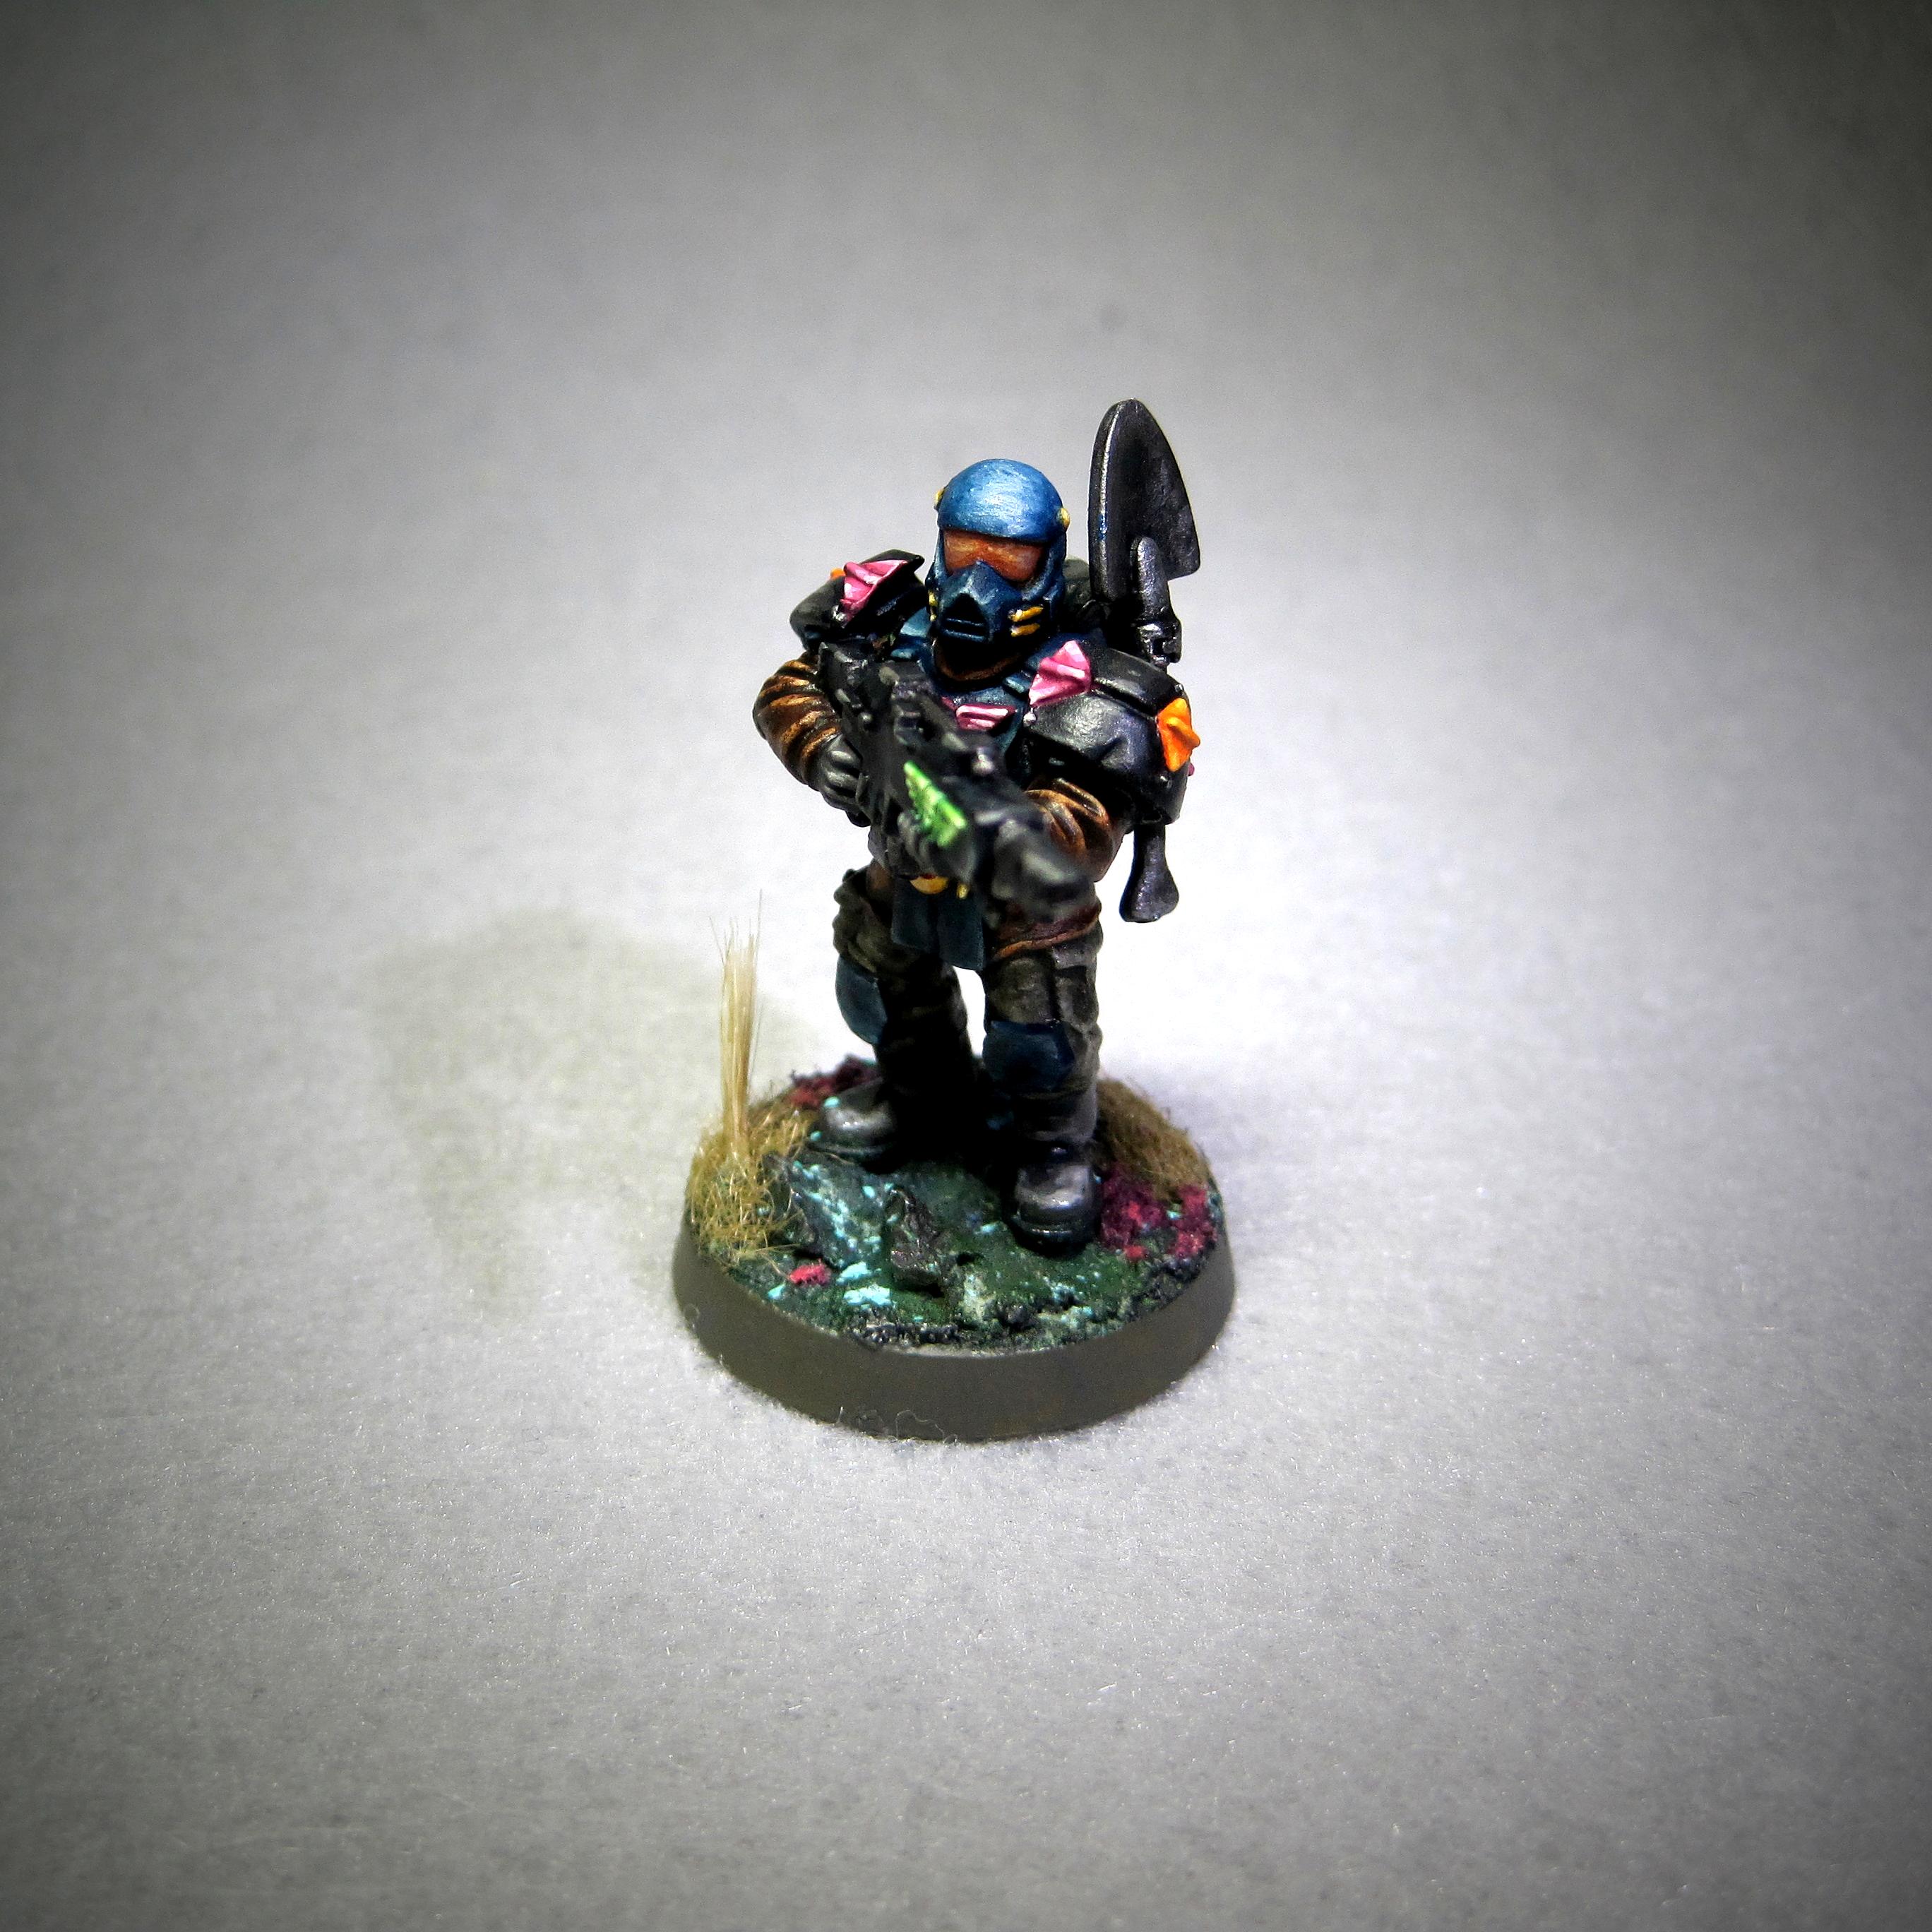 Engineer, Inducted Guard, Inquisitor, Veteran, Warhammer 40,000